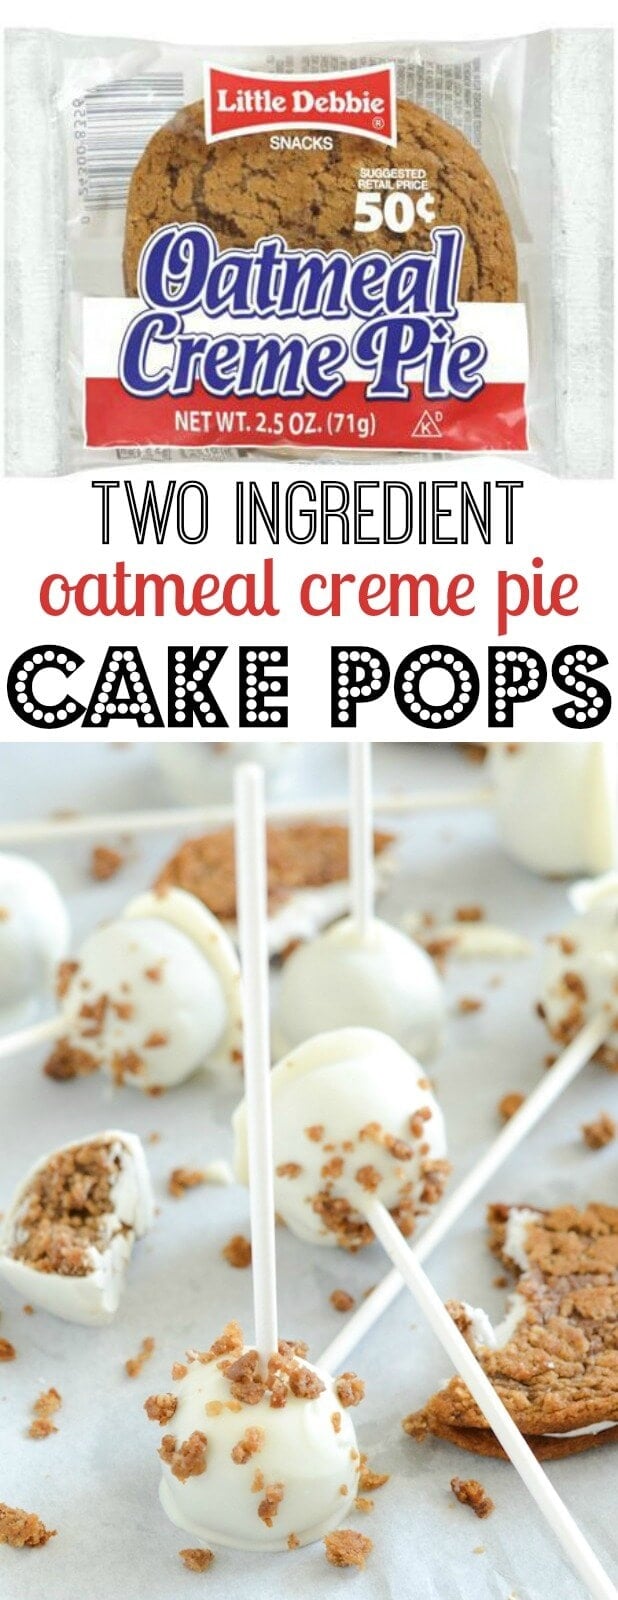 Oatmeal Creme Pie Cake Pops! Only two ingredients to make these delicious cake pops! 